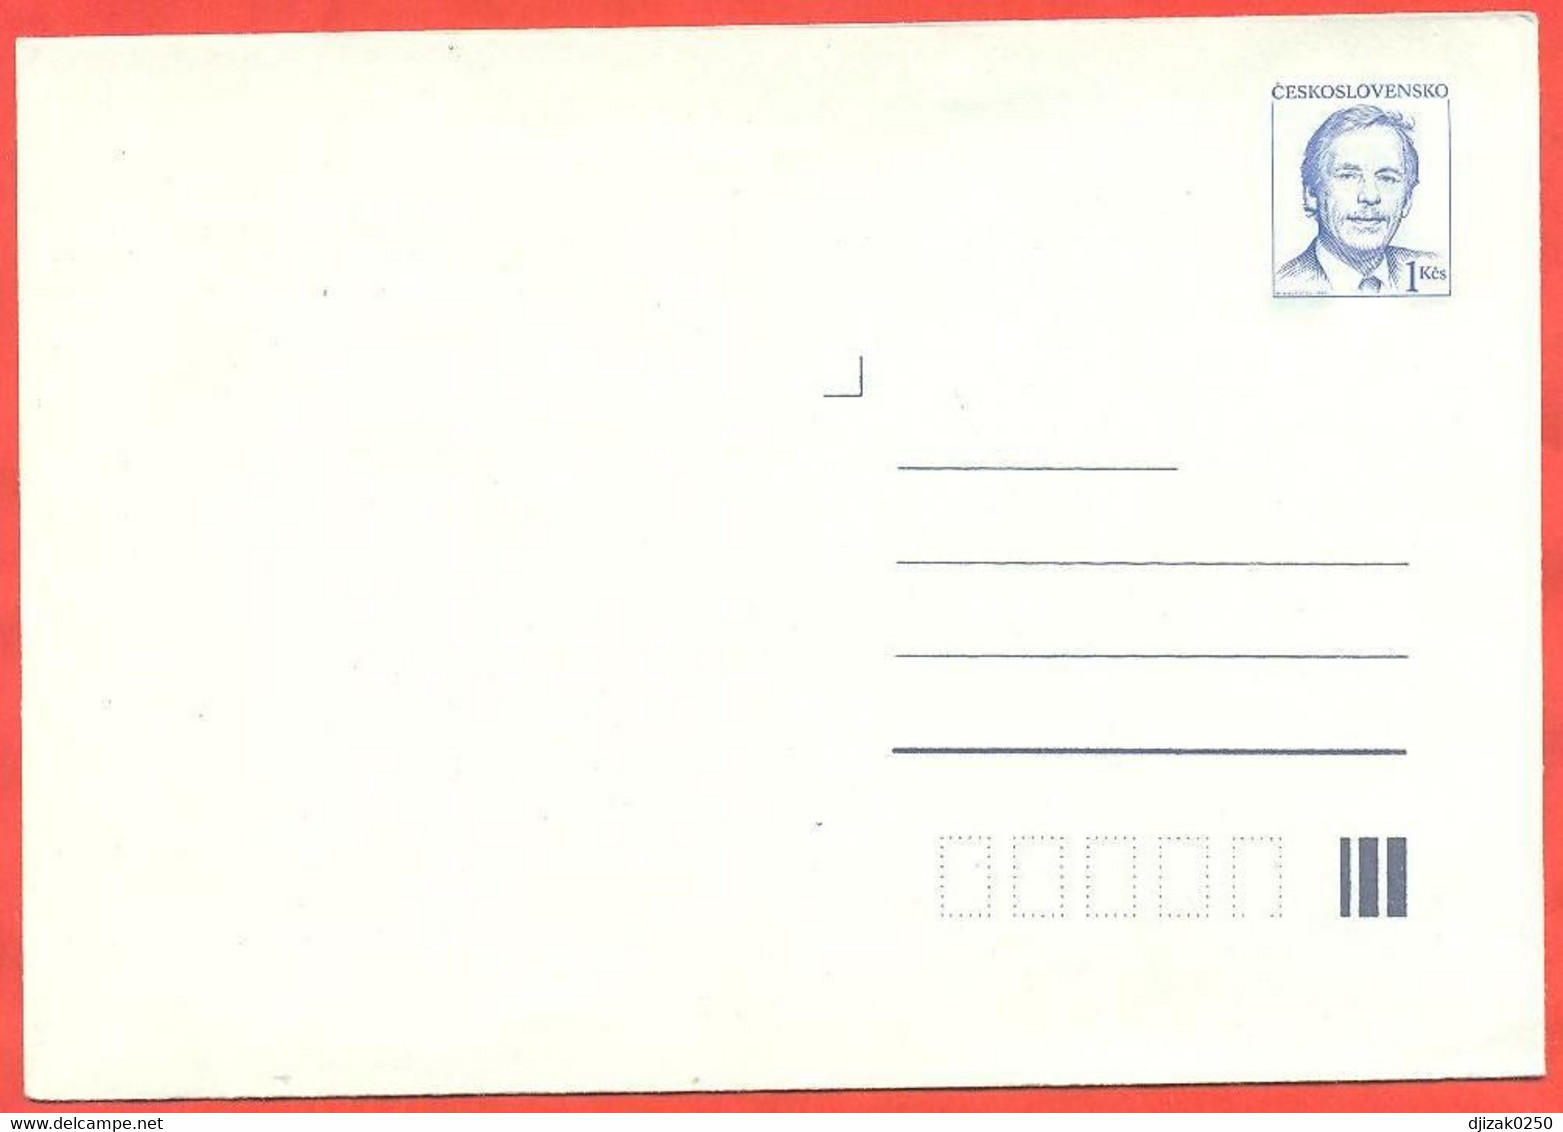 Czechoslovakia 1990. The Envelope With Printed Stamp. Unused. - Omslagen